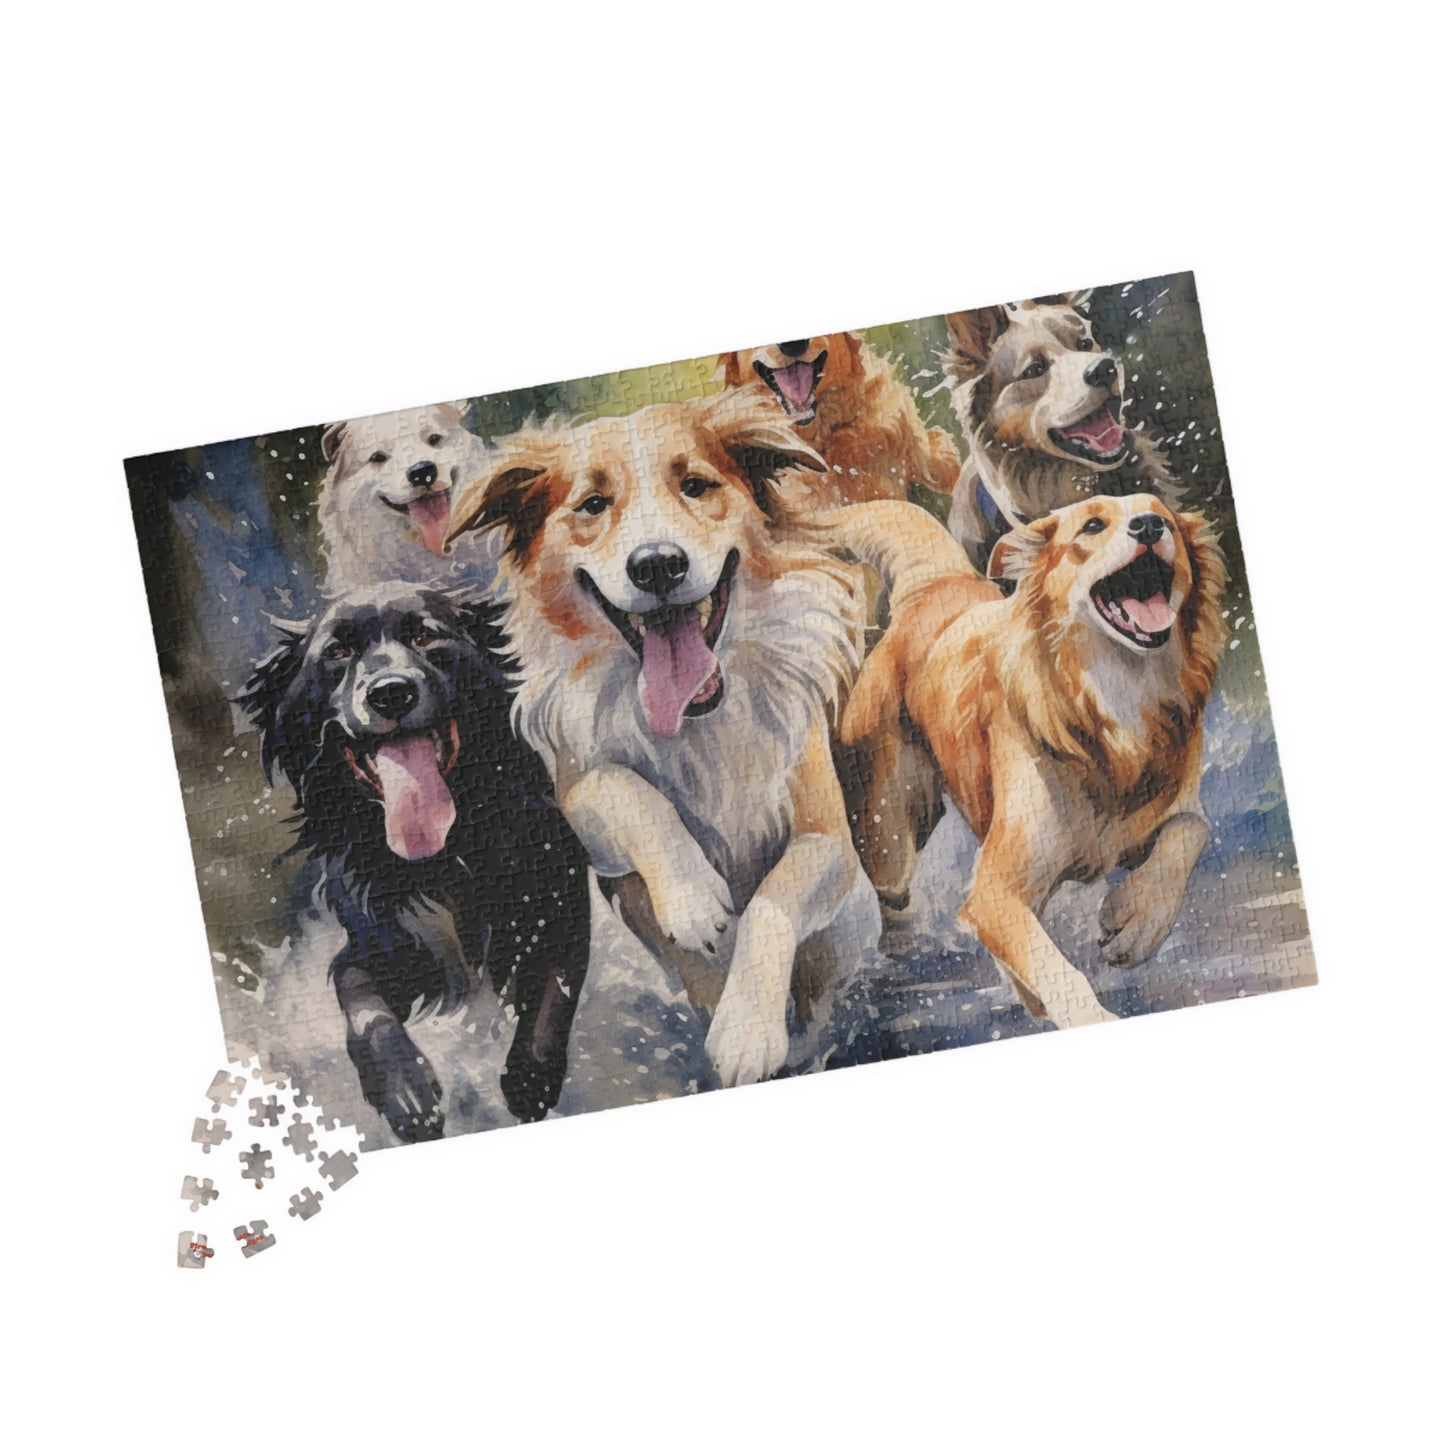 Best Friends Puzzle (110, 252, 500, 1014-piece) | Dogs K9 Canines Mutt Buddies Water Color Playing Fun Running Animal Lovers Jigsaw Jig Saw